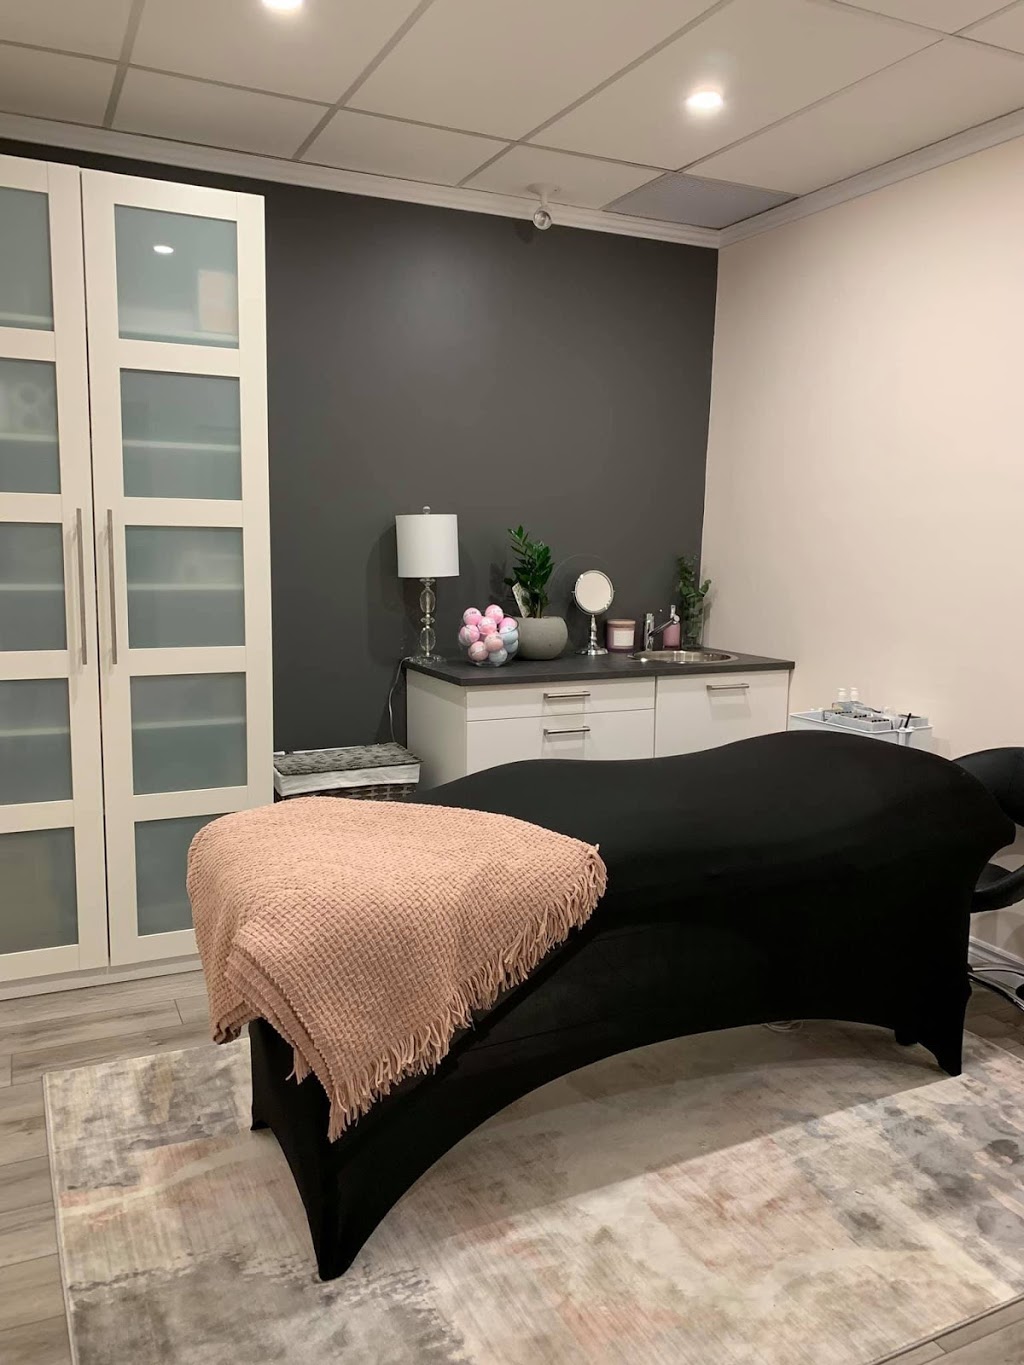 Allure Spa and Wellness Boutique | 1428 Pelham St, Fonthill, ON L0S 1E0, Canada | Phone: (905) 932-0619